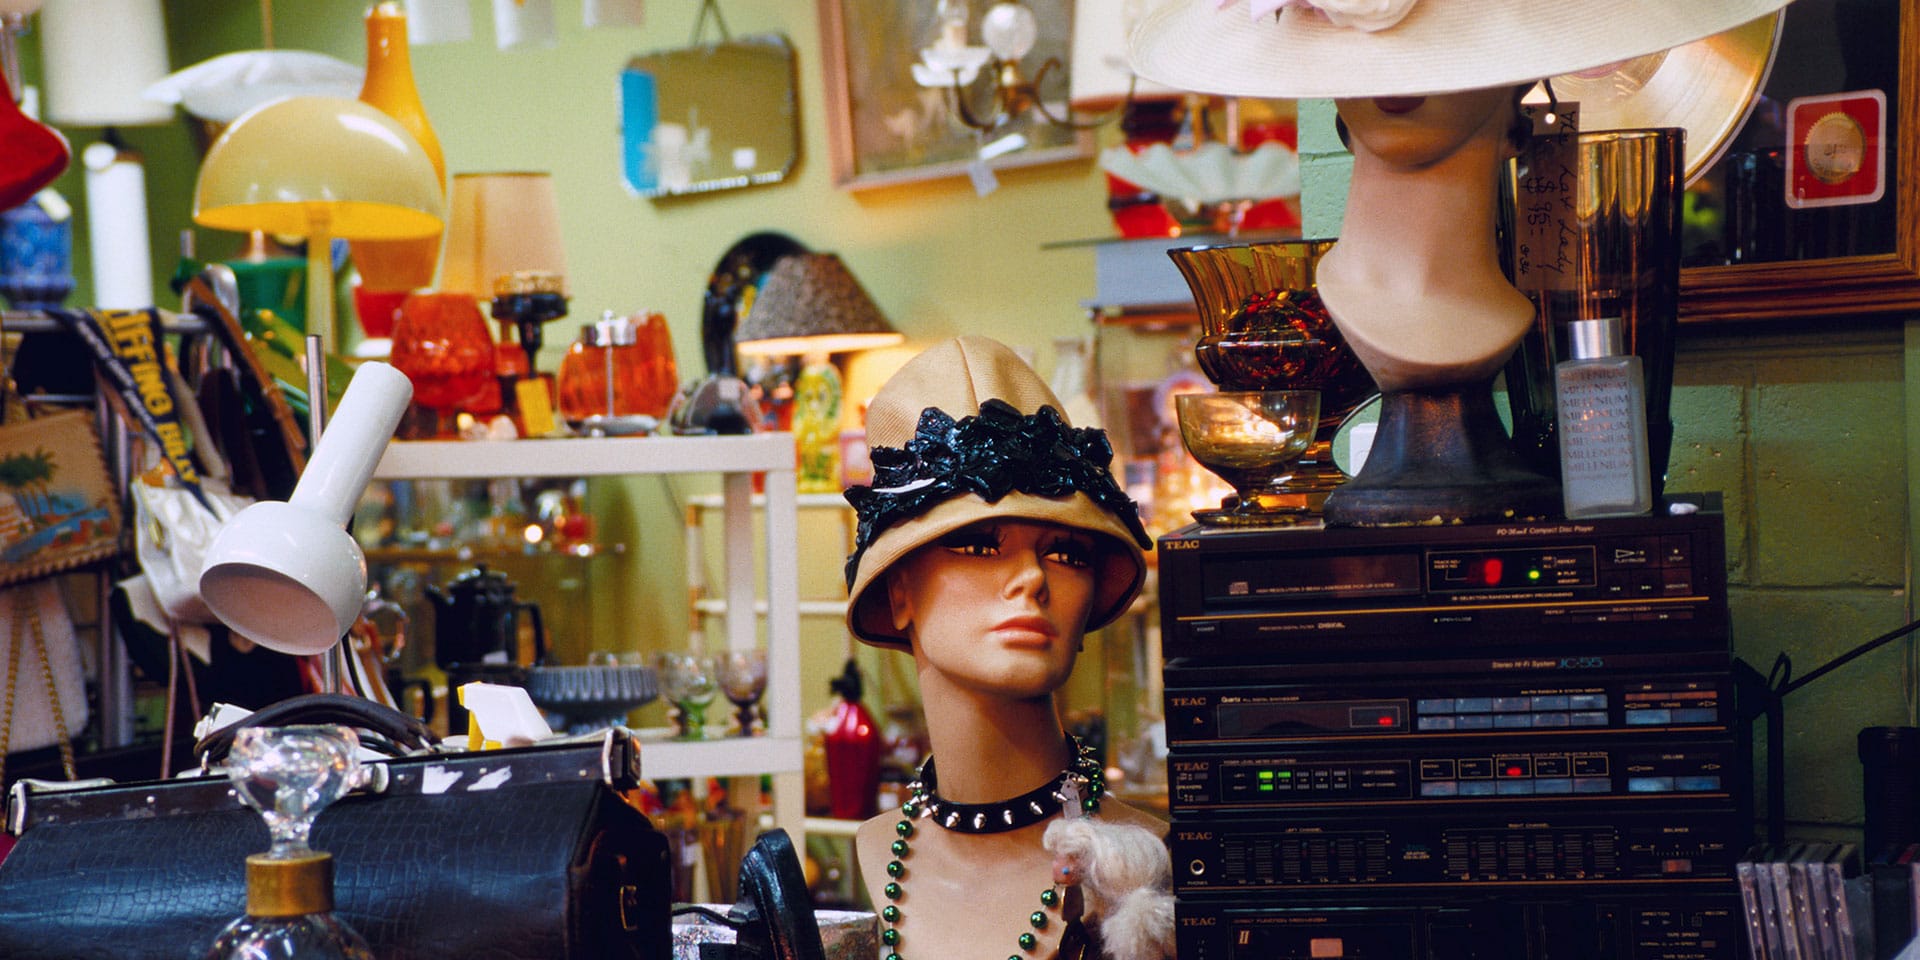 Melbourne’s Vintage Shopping Scene is Legit. Here’s Where to Stretch Your Wallet.